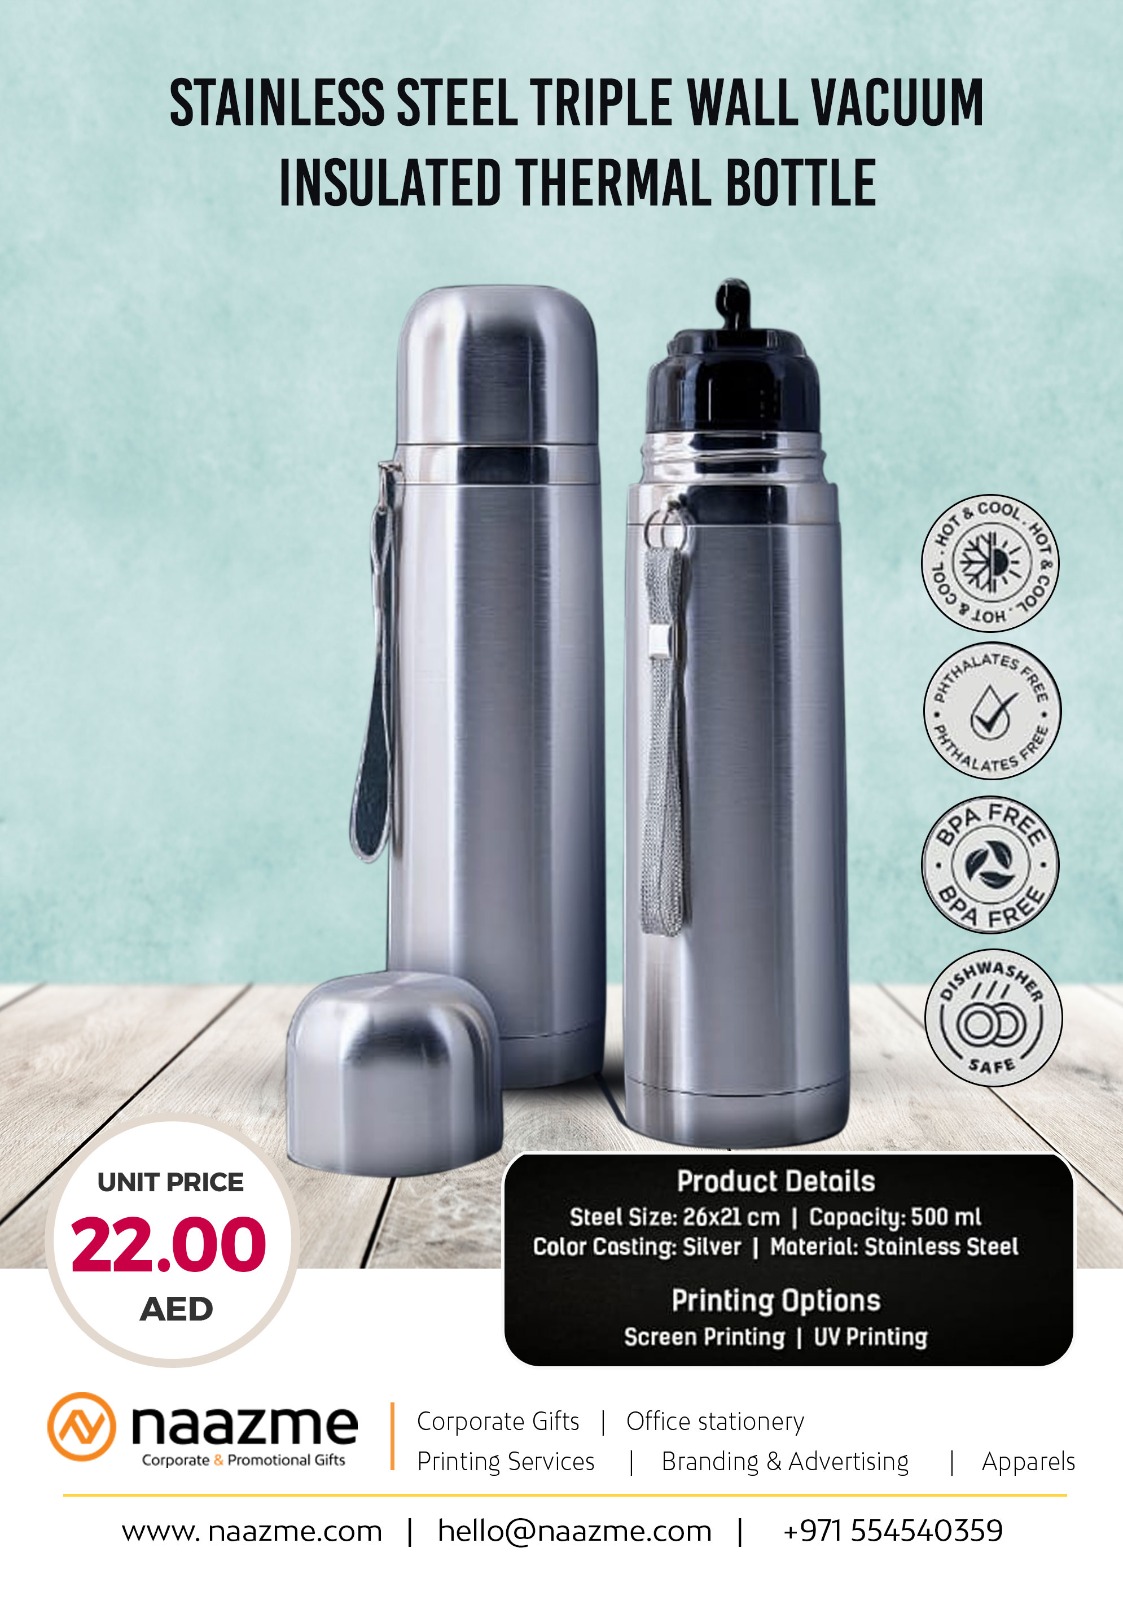 Stainless Steel Triple Wall Vacuum Insulated Thermal Bottle